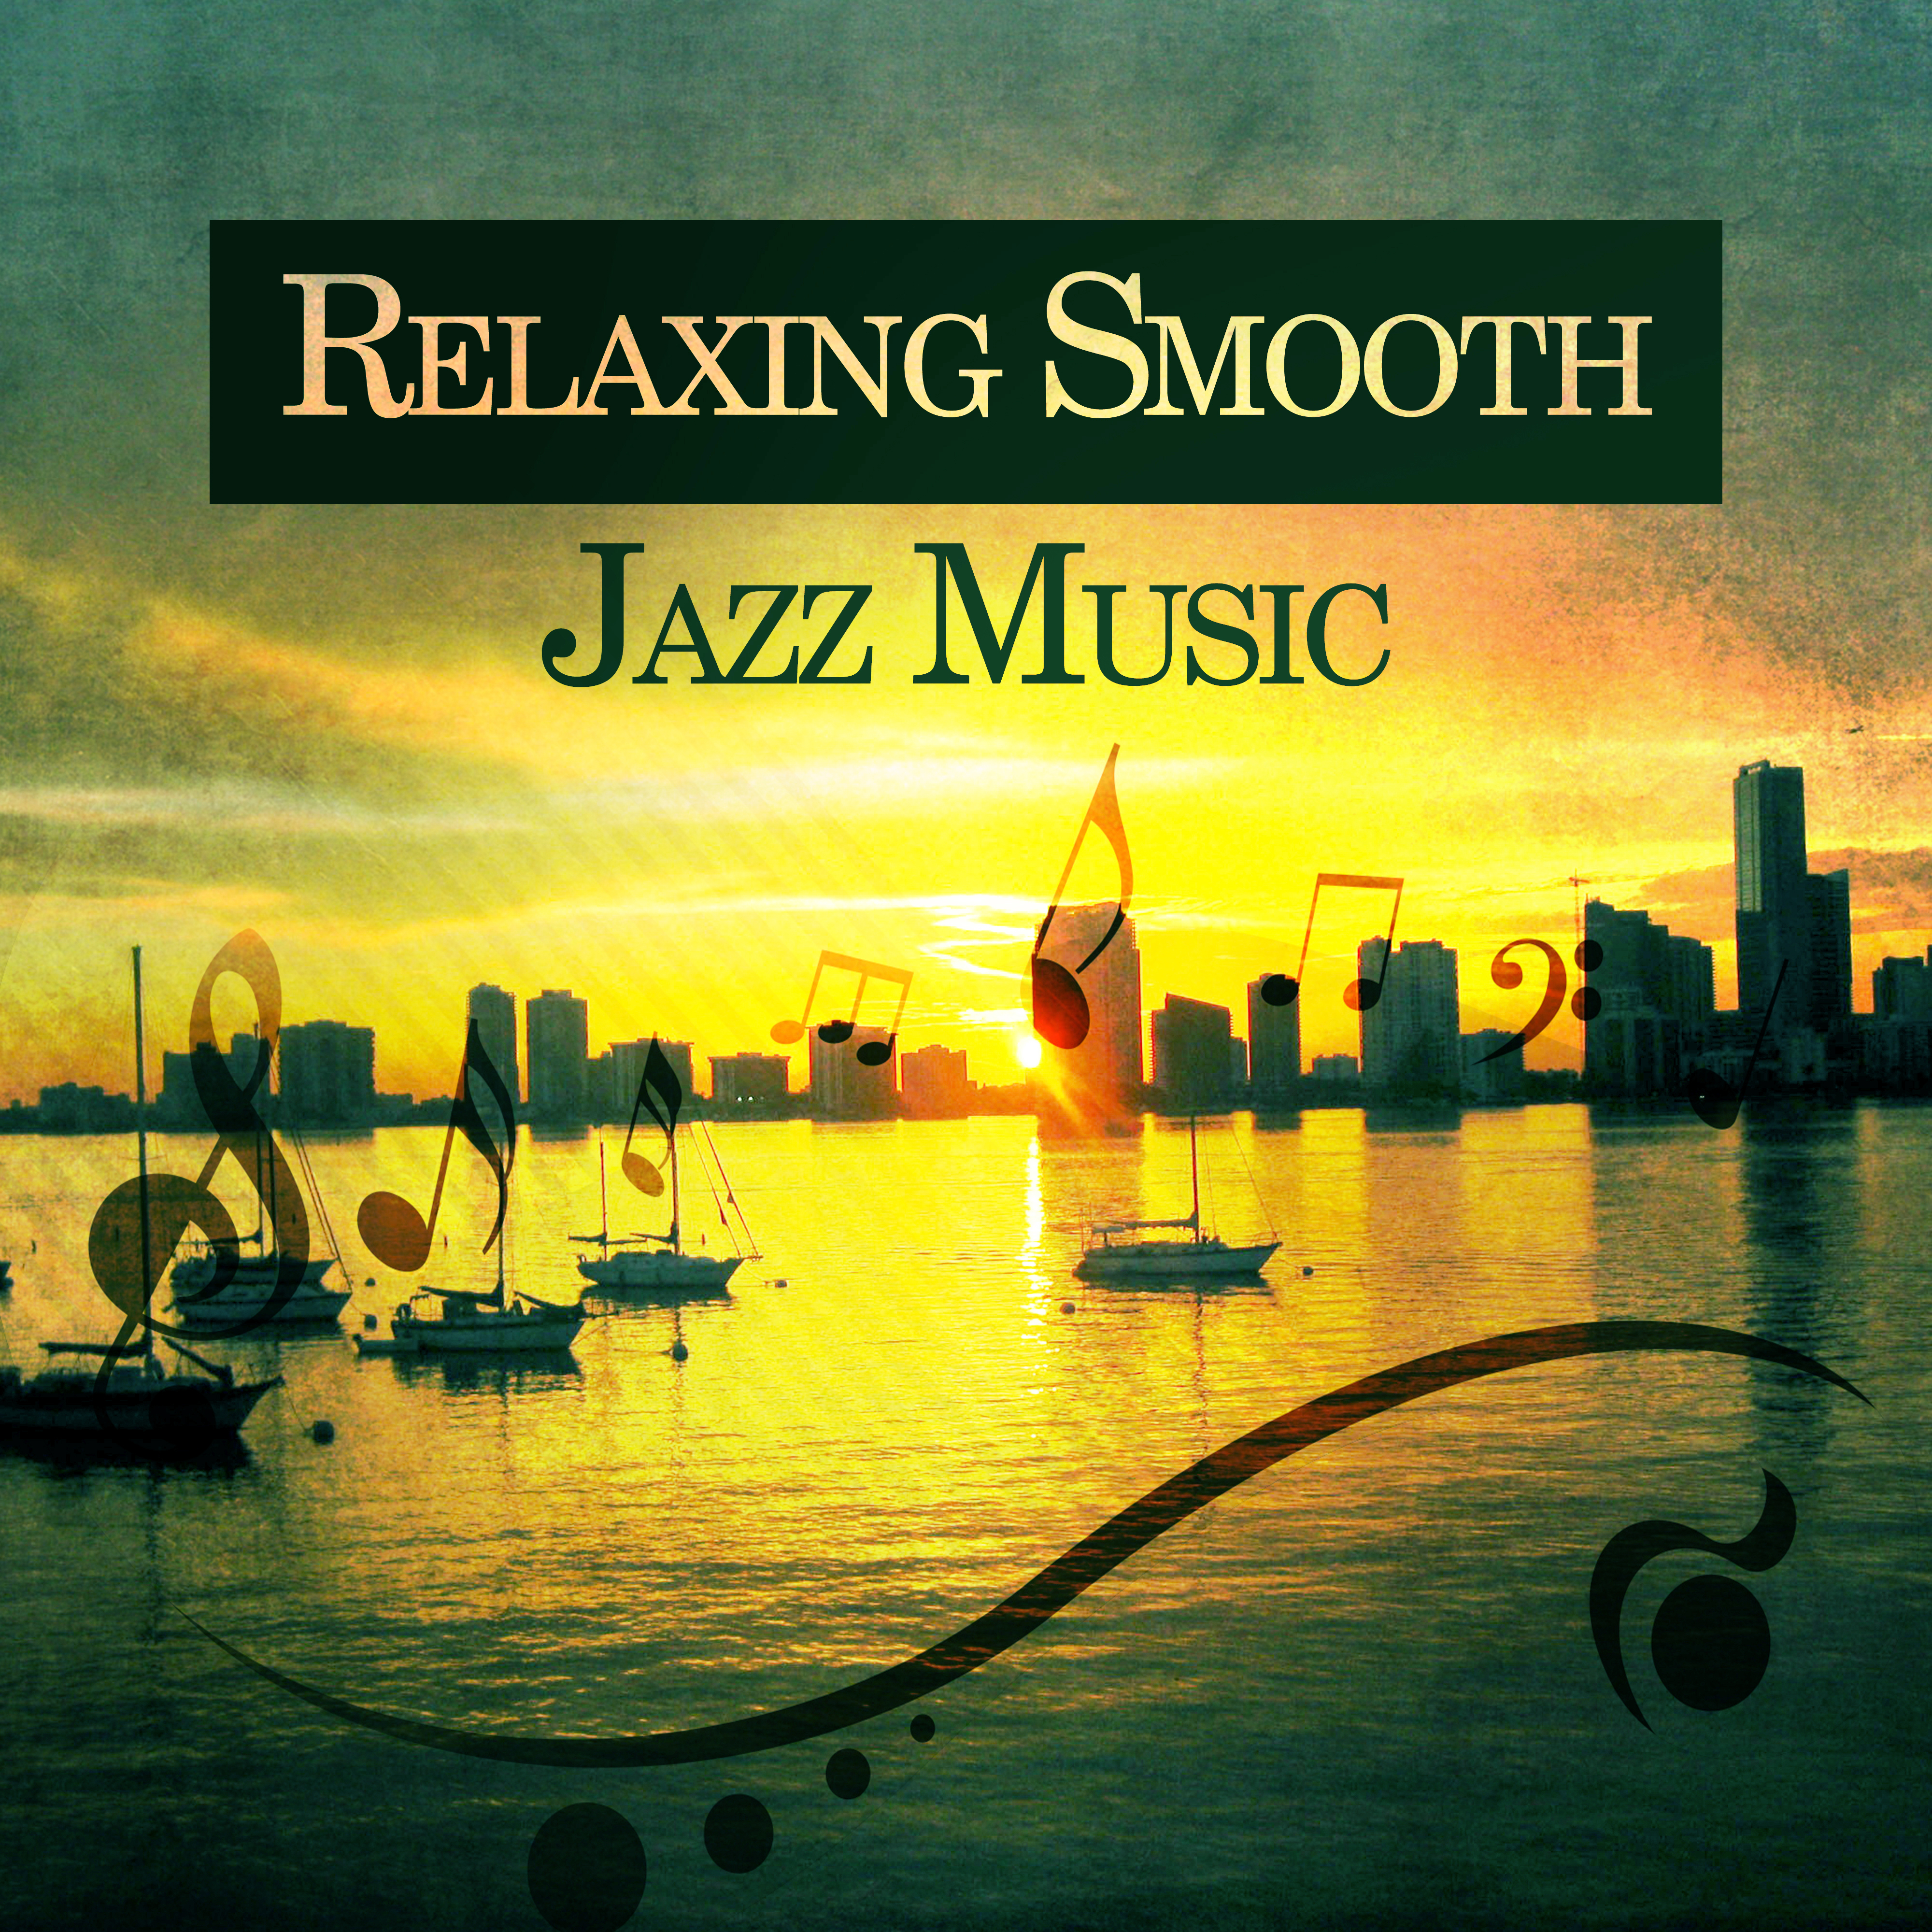 Relaxing Smooth Jazz Music  Soothing Jazz Music, Rest with Piano Bar, Smooth Sounds to Relax